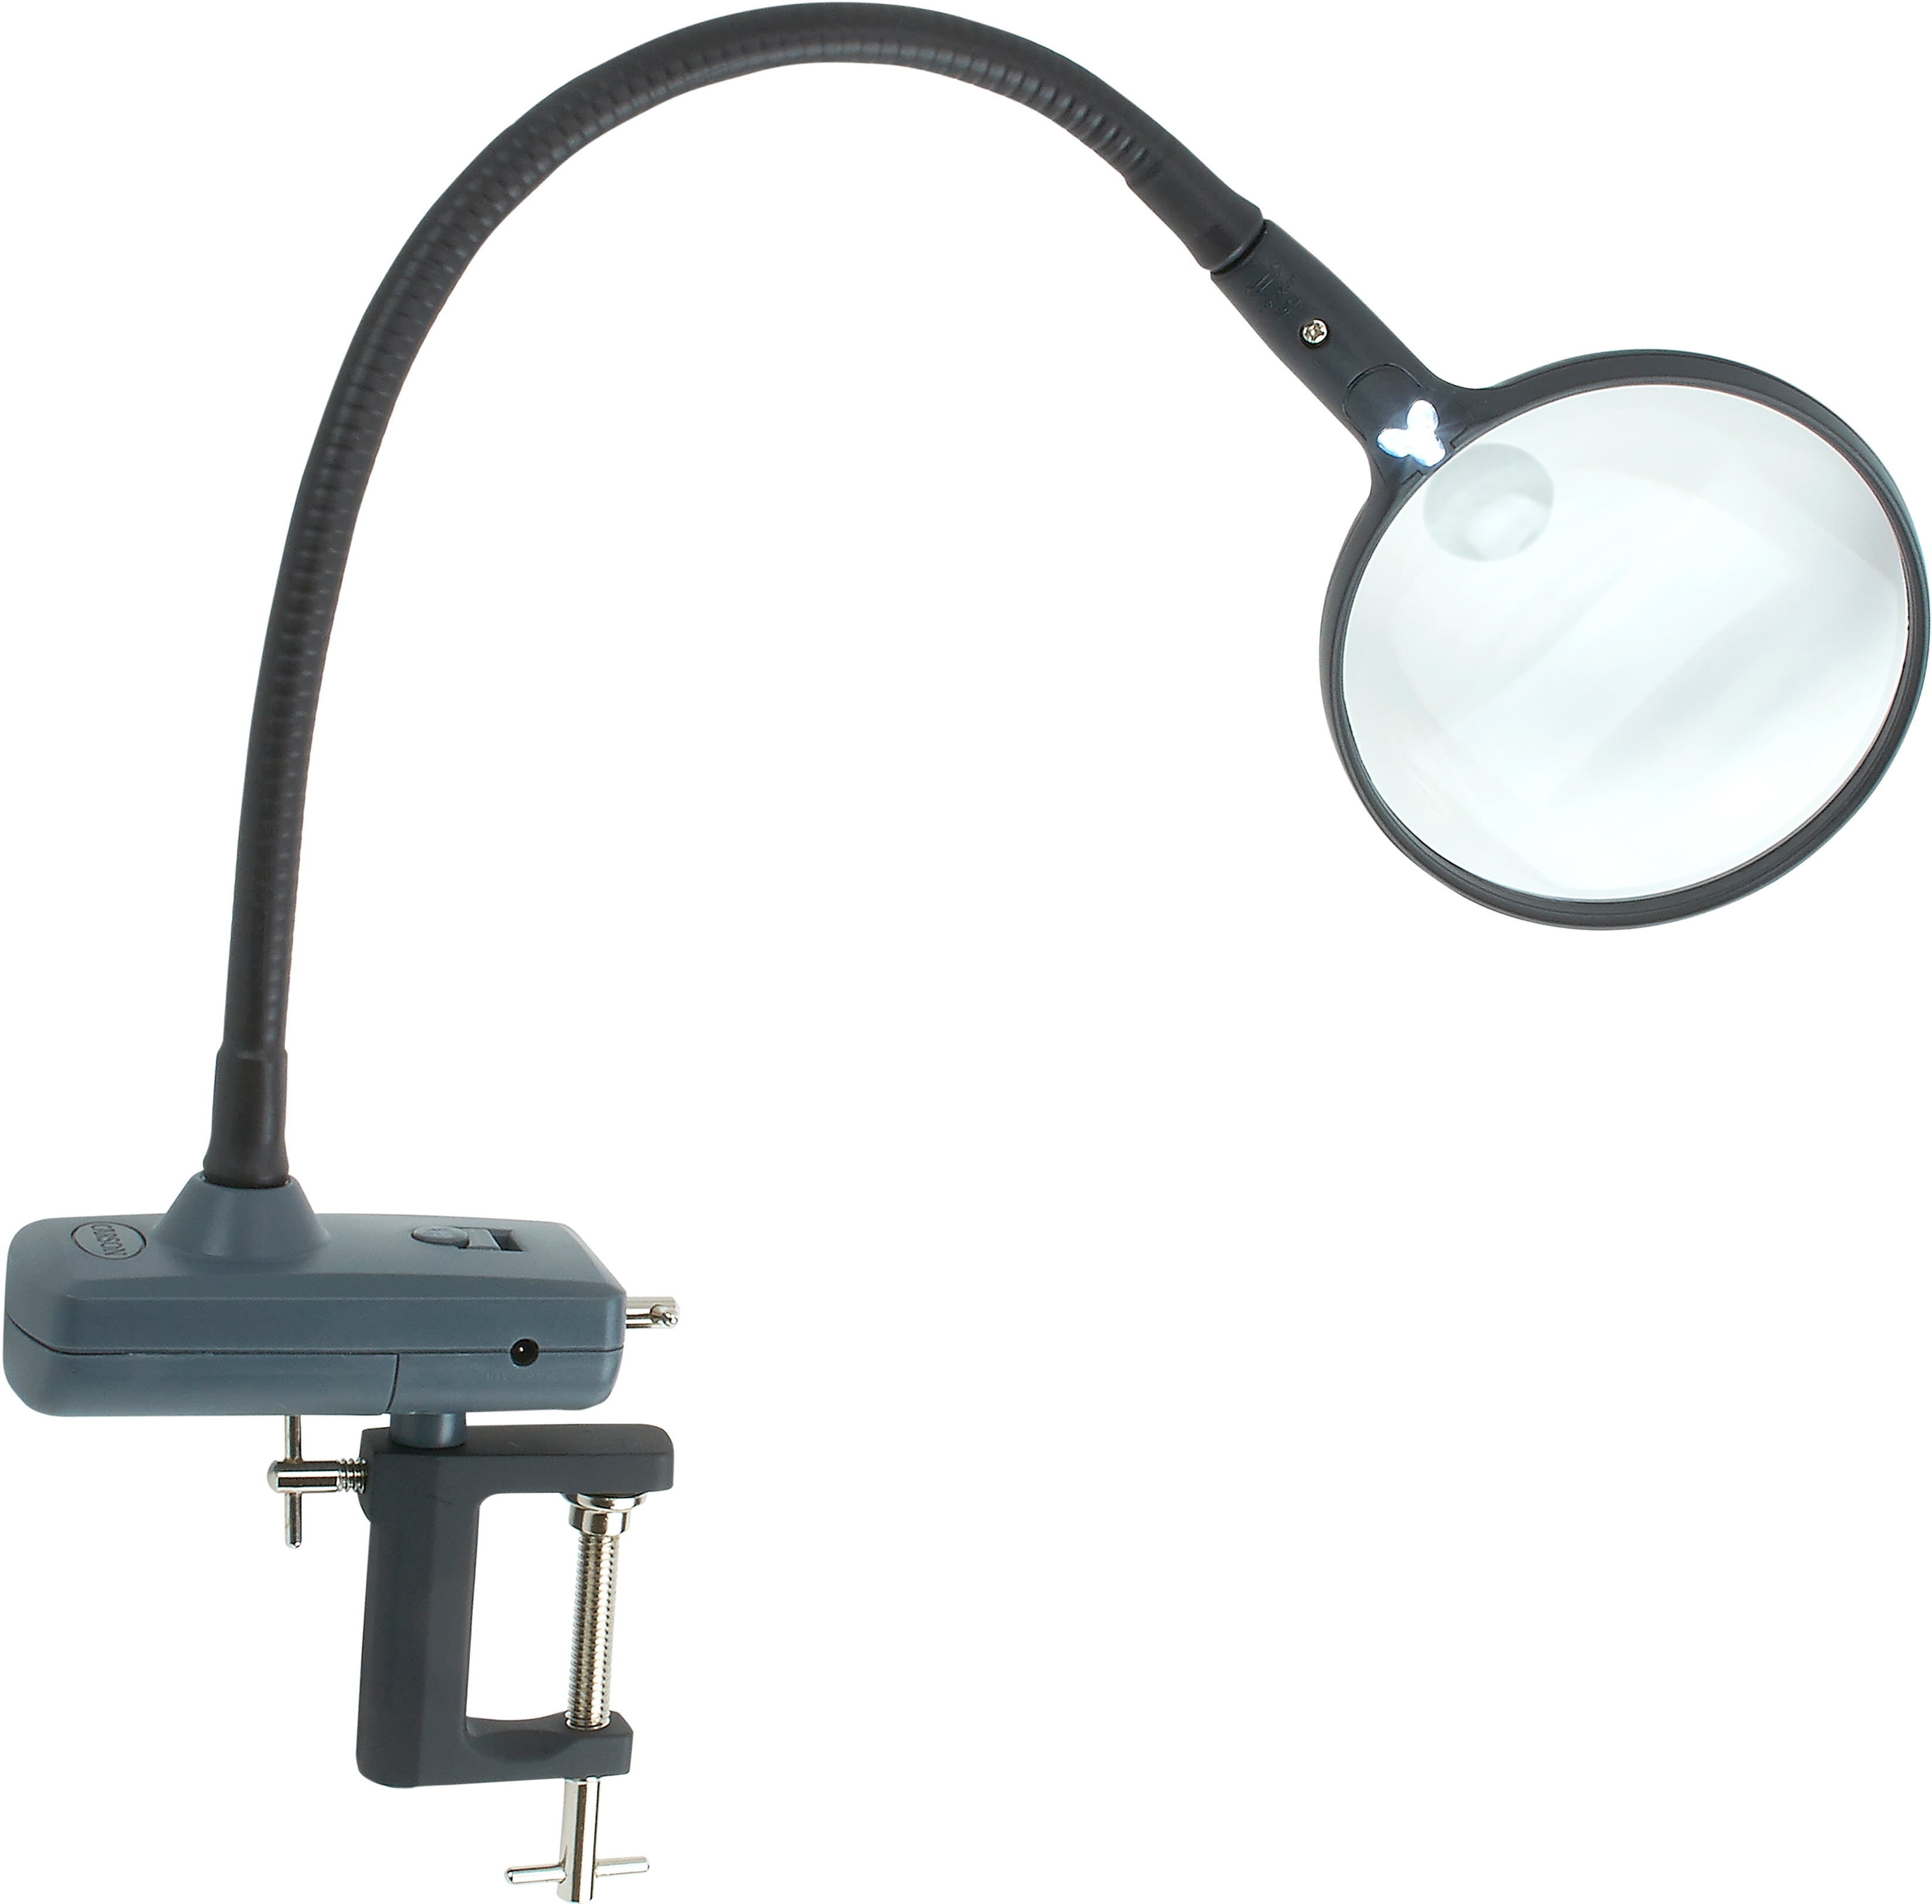 Carson AS-95 Lume Series 2x Aspheric COB LED 4.5-Inch Magnifier with 7X Spot Lens